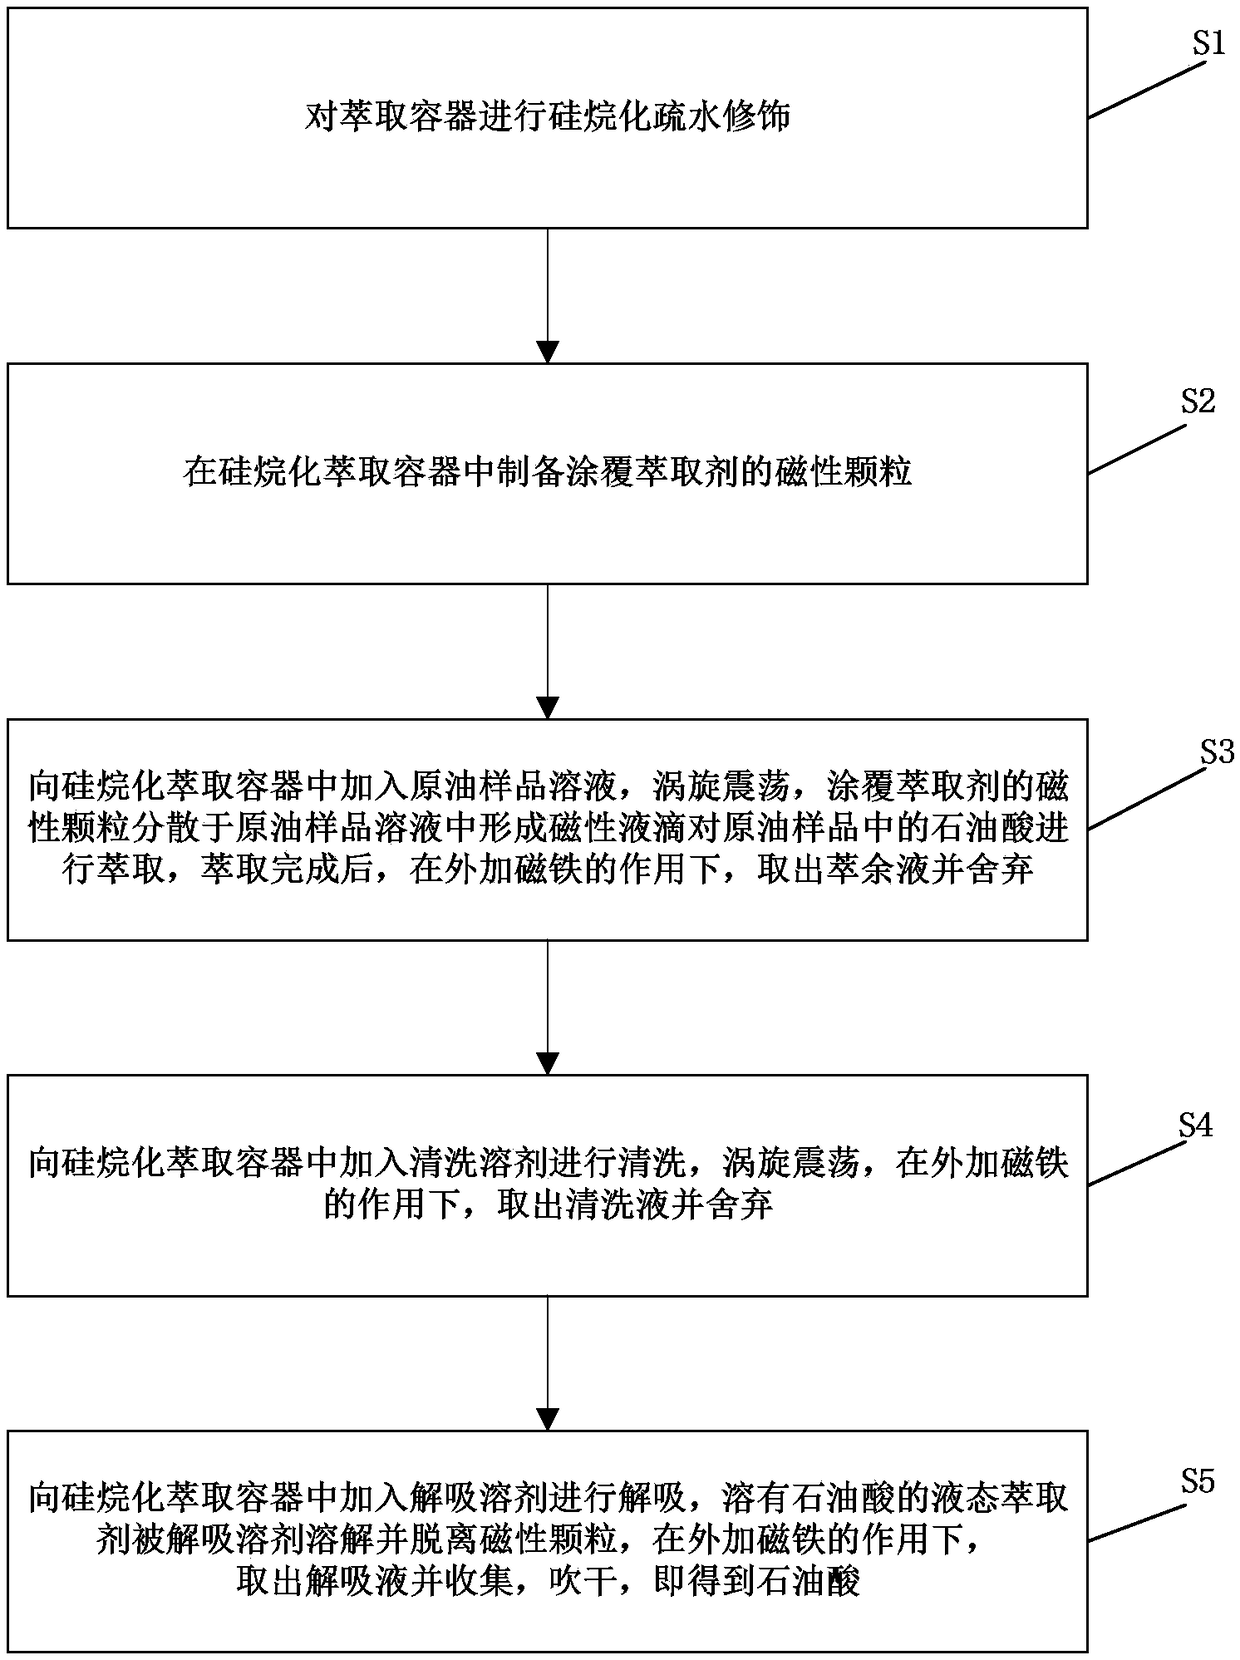 Magnetic liquid drop dispersion and extraction method for separating petroleum acid